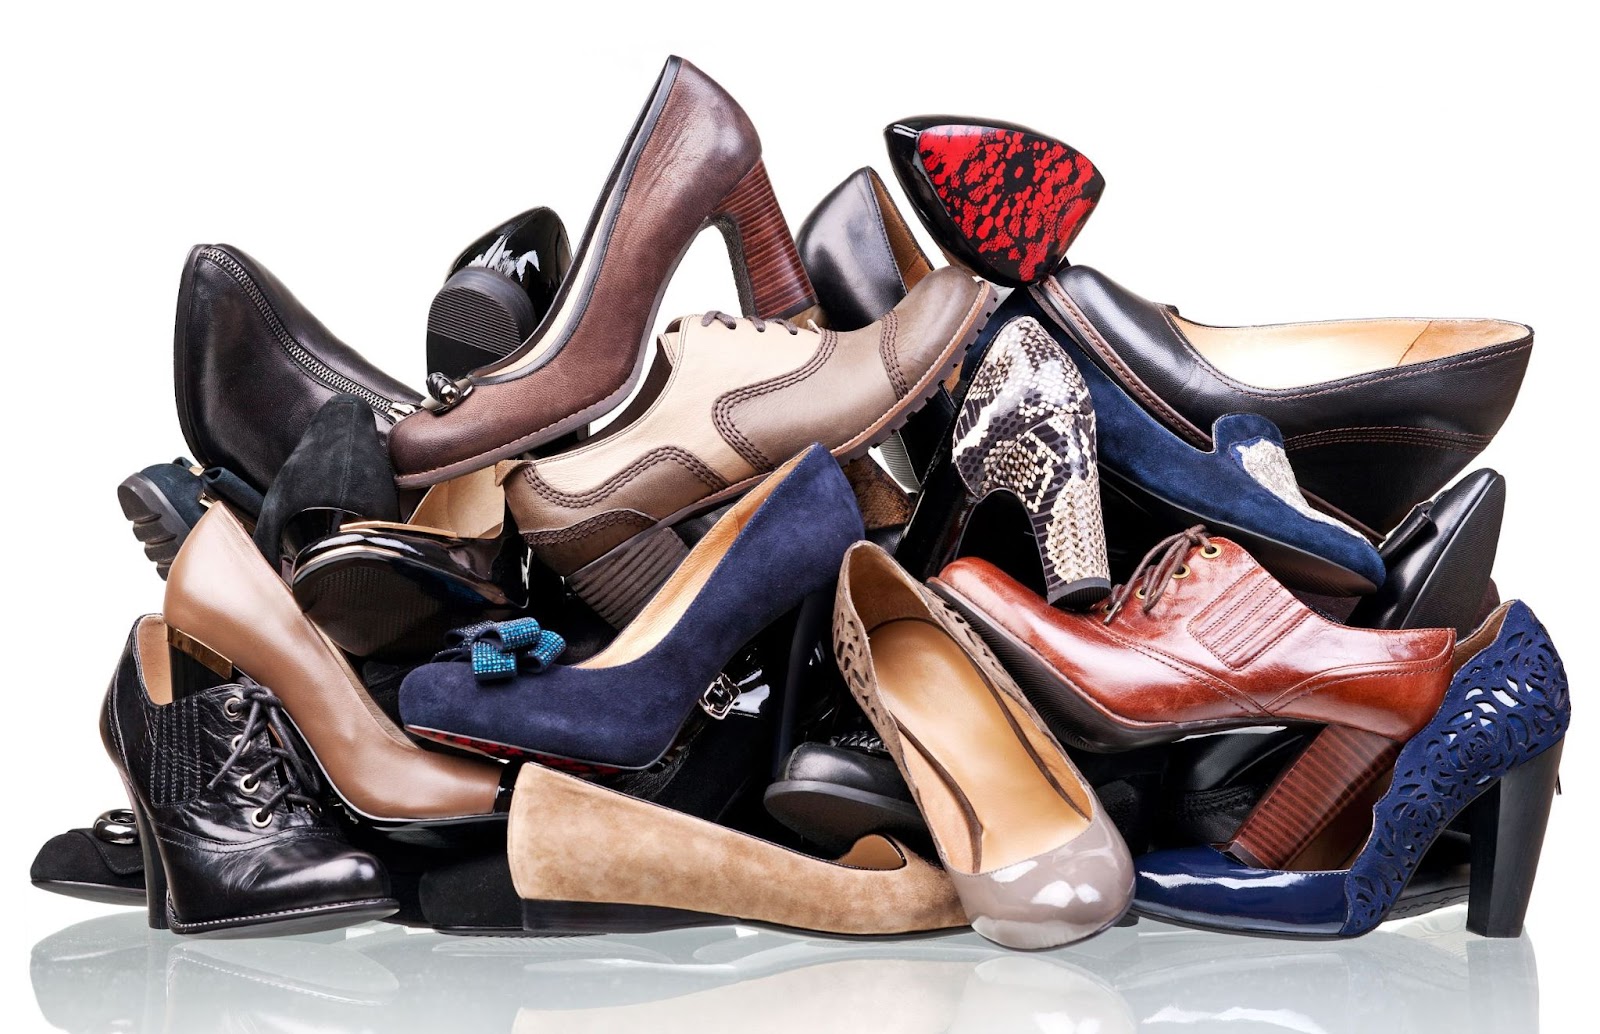 messy-pile-of-womans-shoes